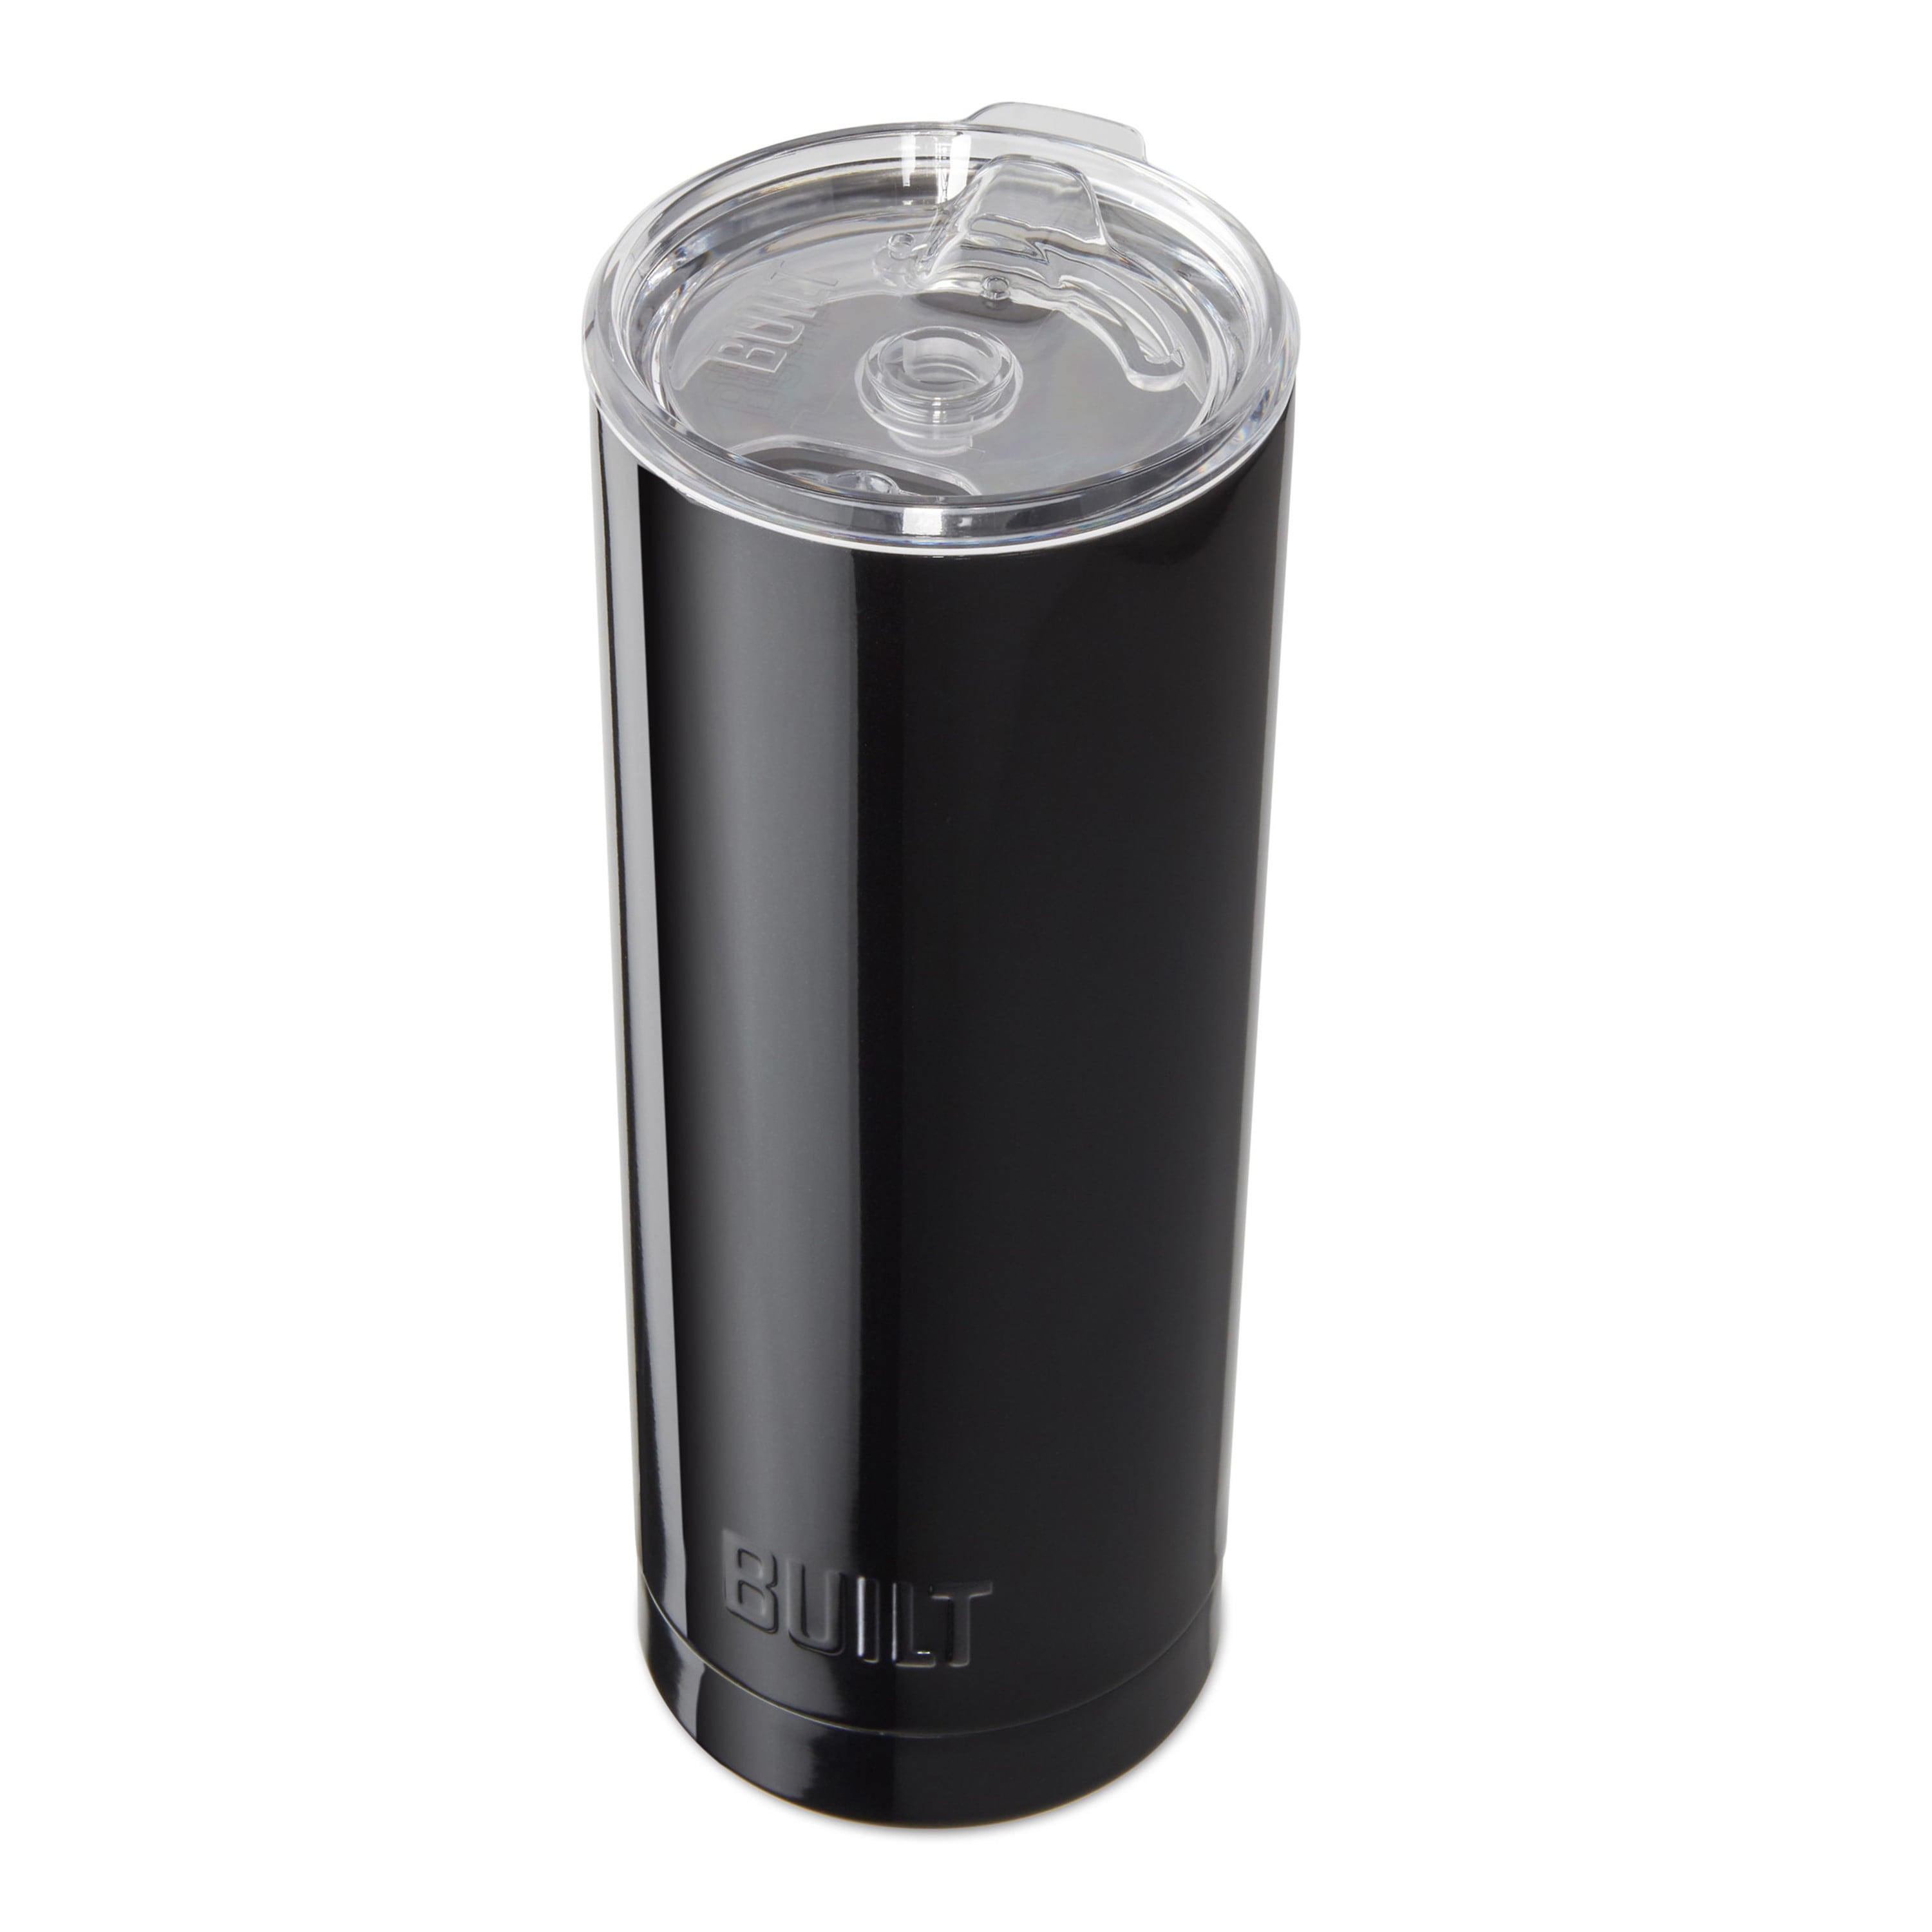 Built 20 Ounce Double Wall Vacuum Sealed Stainless Steel Coffee and Water Tumbler Easy to Clean Tritan Lid with Rotating Splash Guard, Black, 5286362